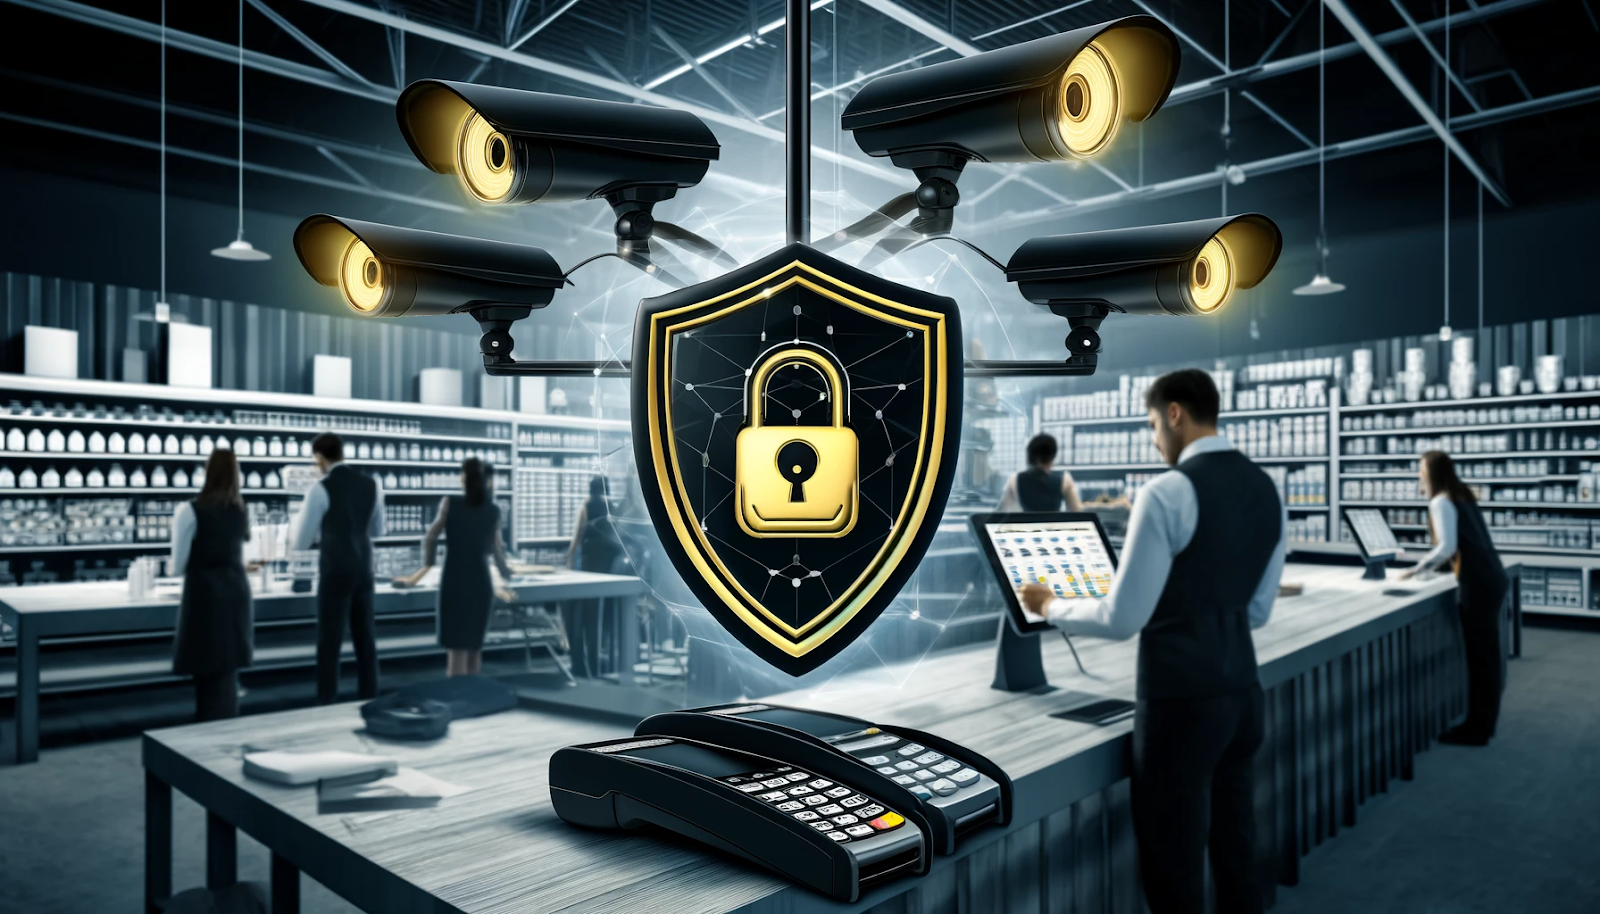 A photorealistic image symbolizing retail fraud prevention, featuring surveillance cameras, secure POS systems, and trained employees, with black and gold colors to highlight security.